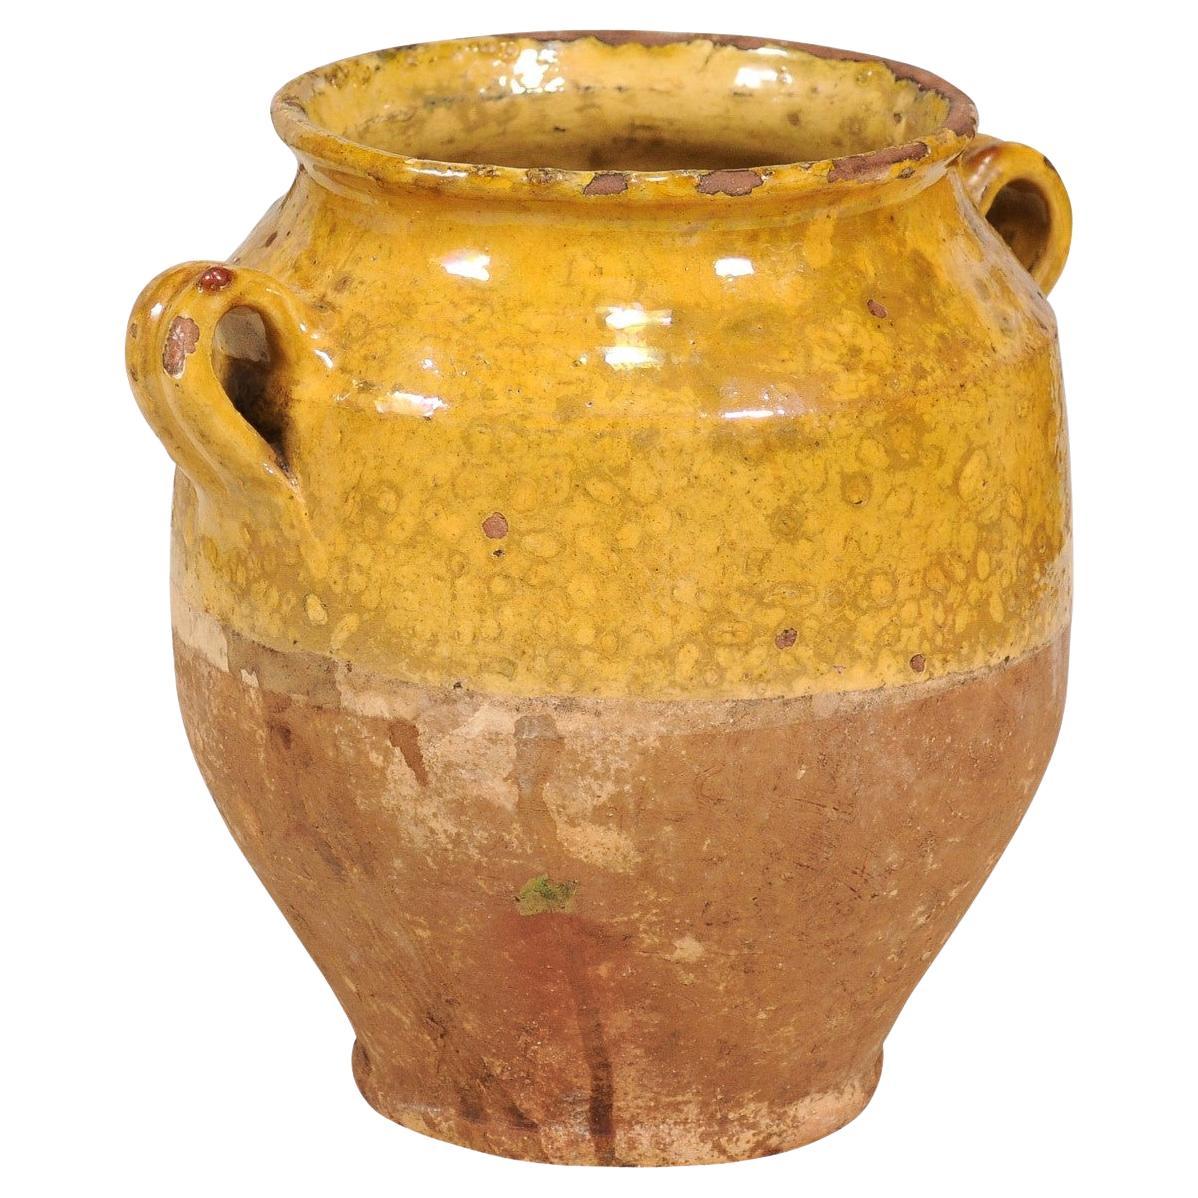 Rustic 19th Century French Provincial Pot à Confit with Yellow Glaze and Handles